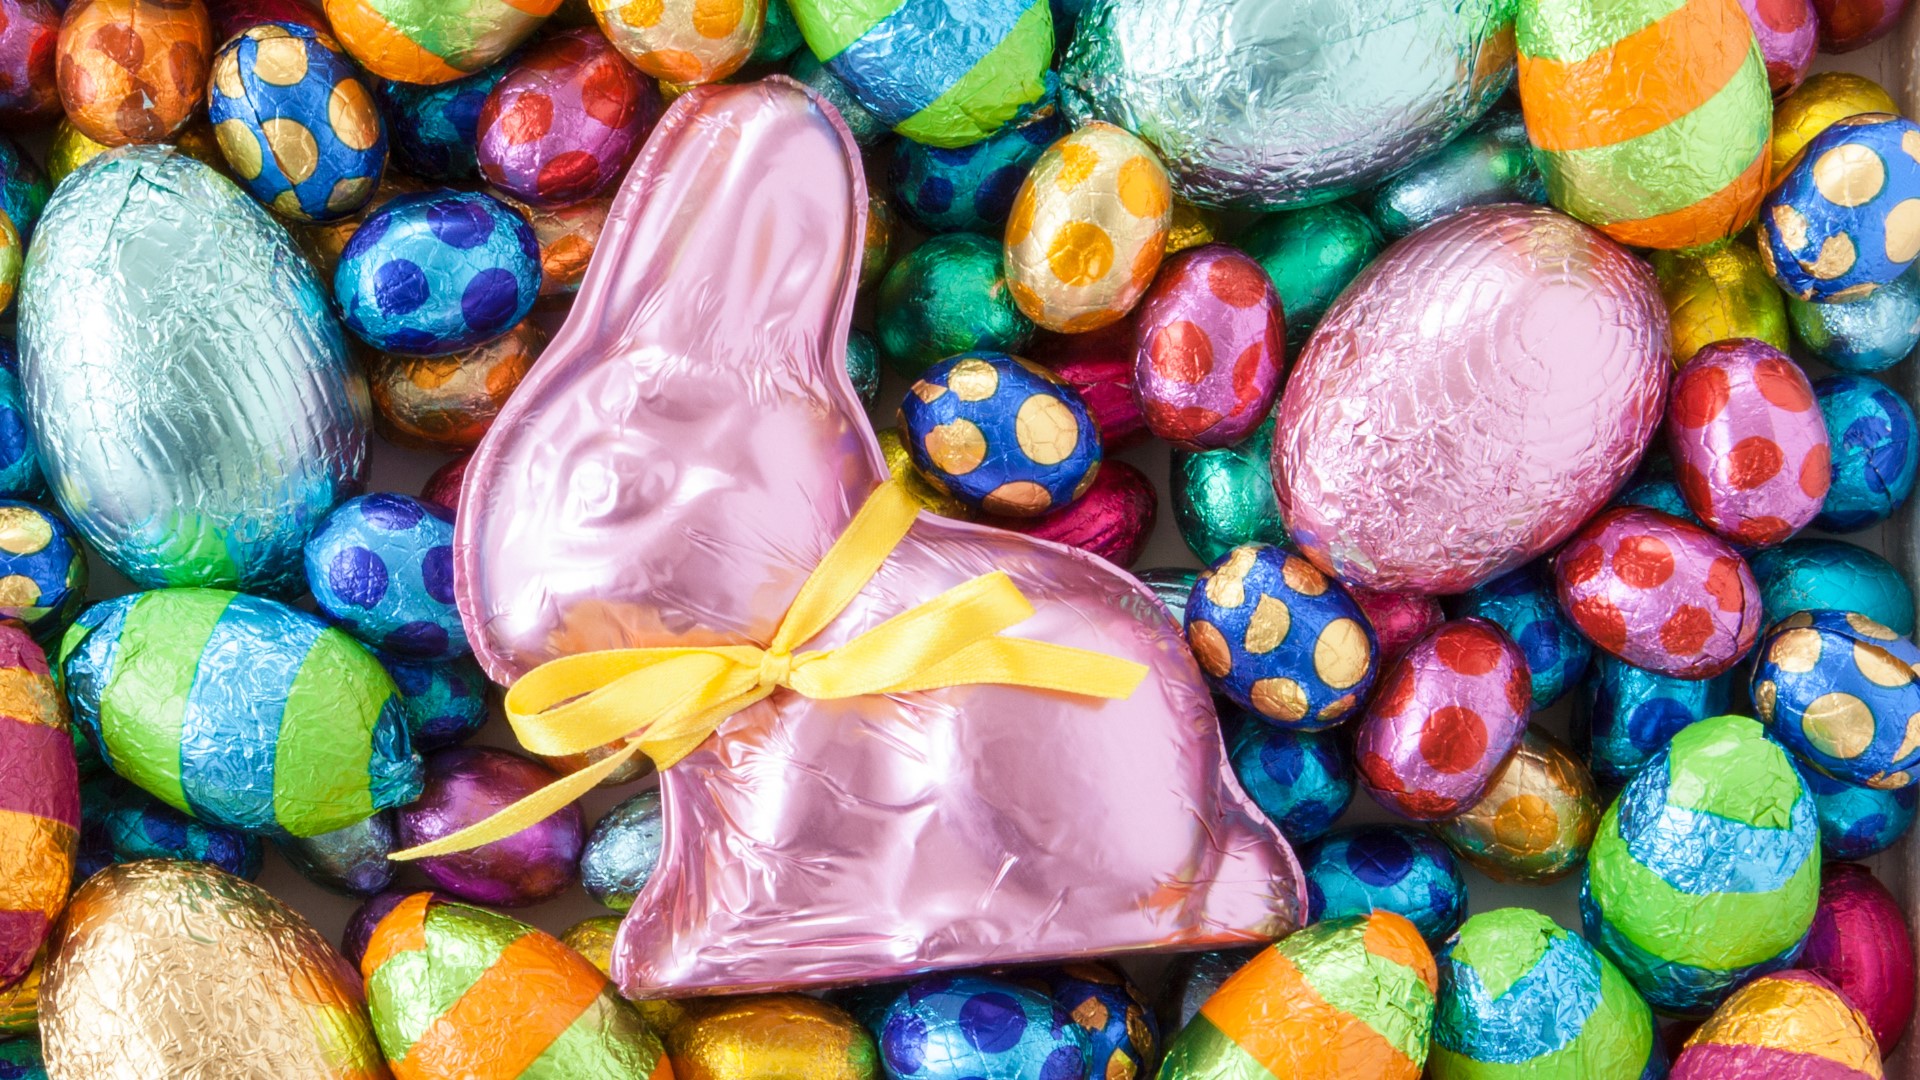 Reese's Peanut Butter Chocolate Eggs continues to dominate in annual Easter candy power rankings.